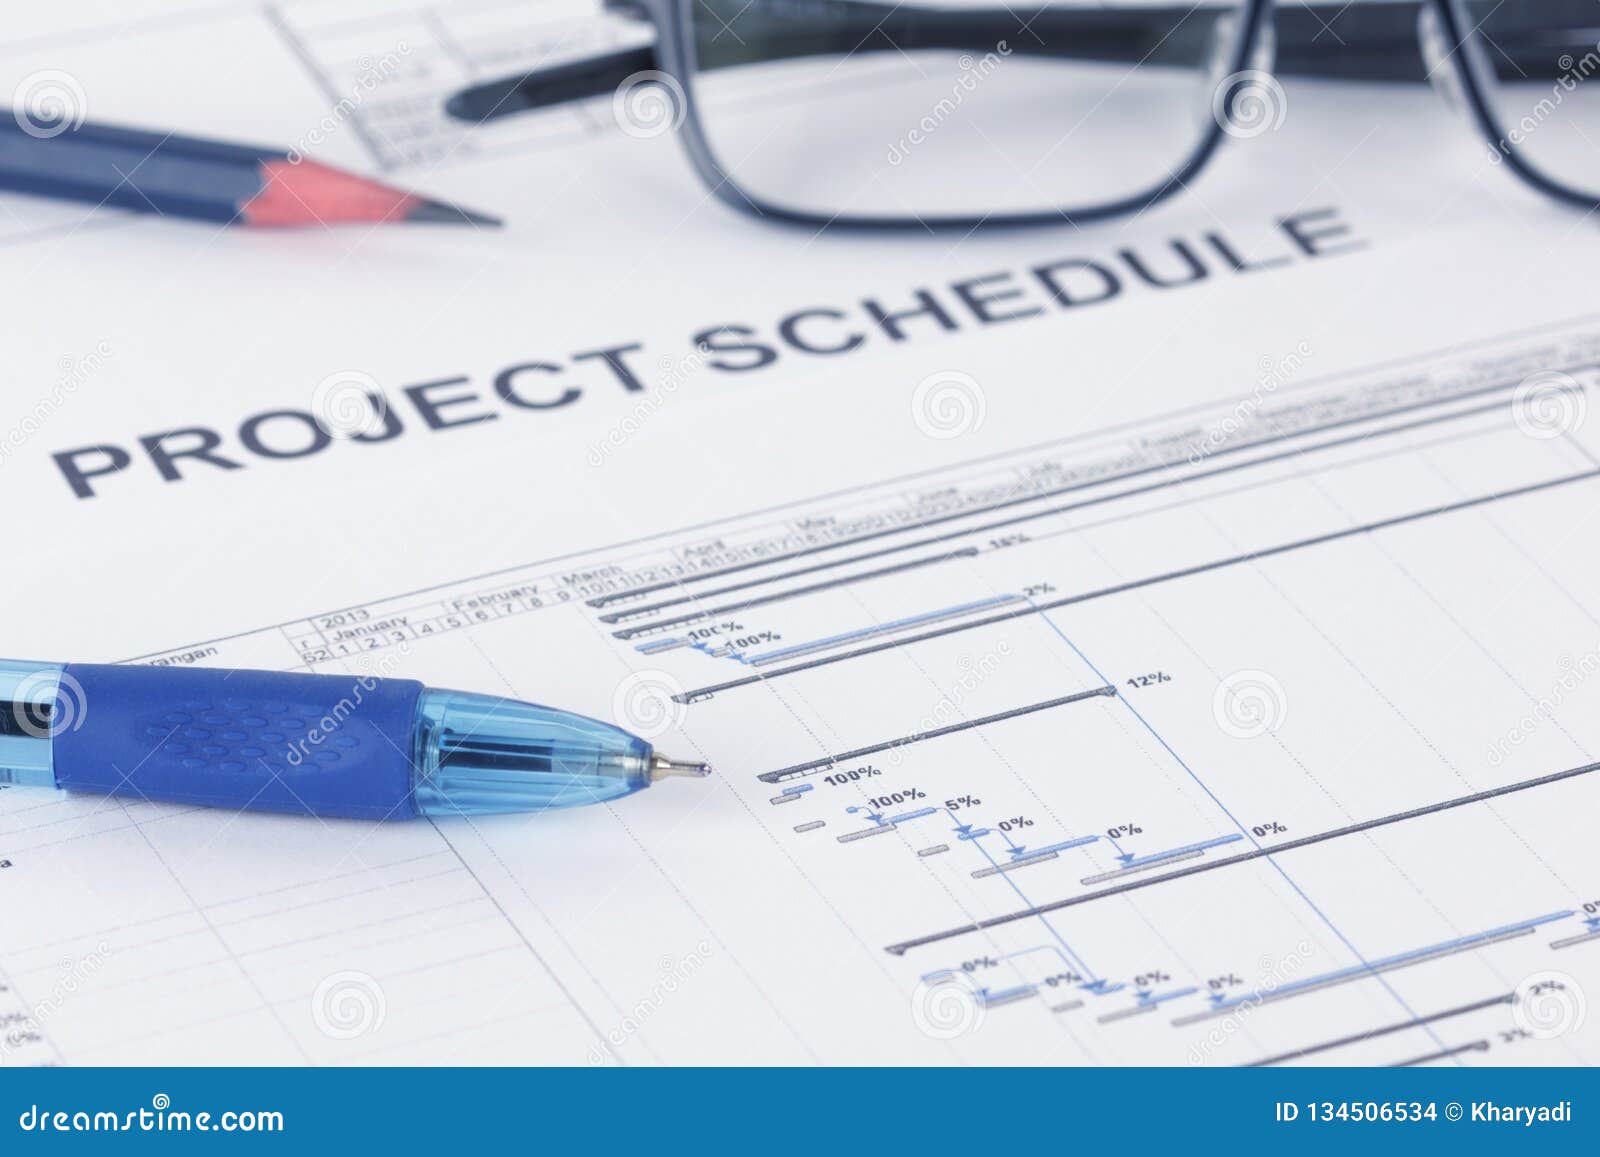 project schedule document with pen, pencil, eyeglases and gantt chart